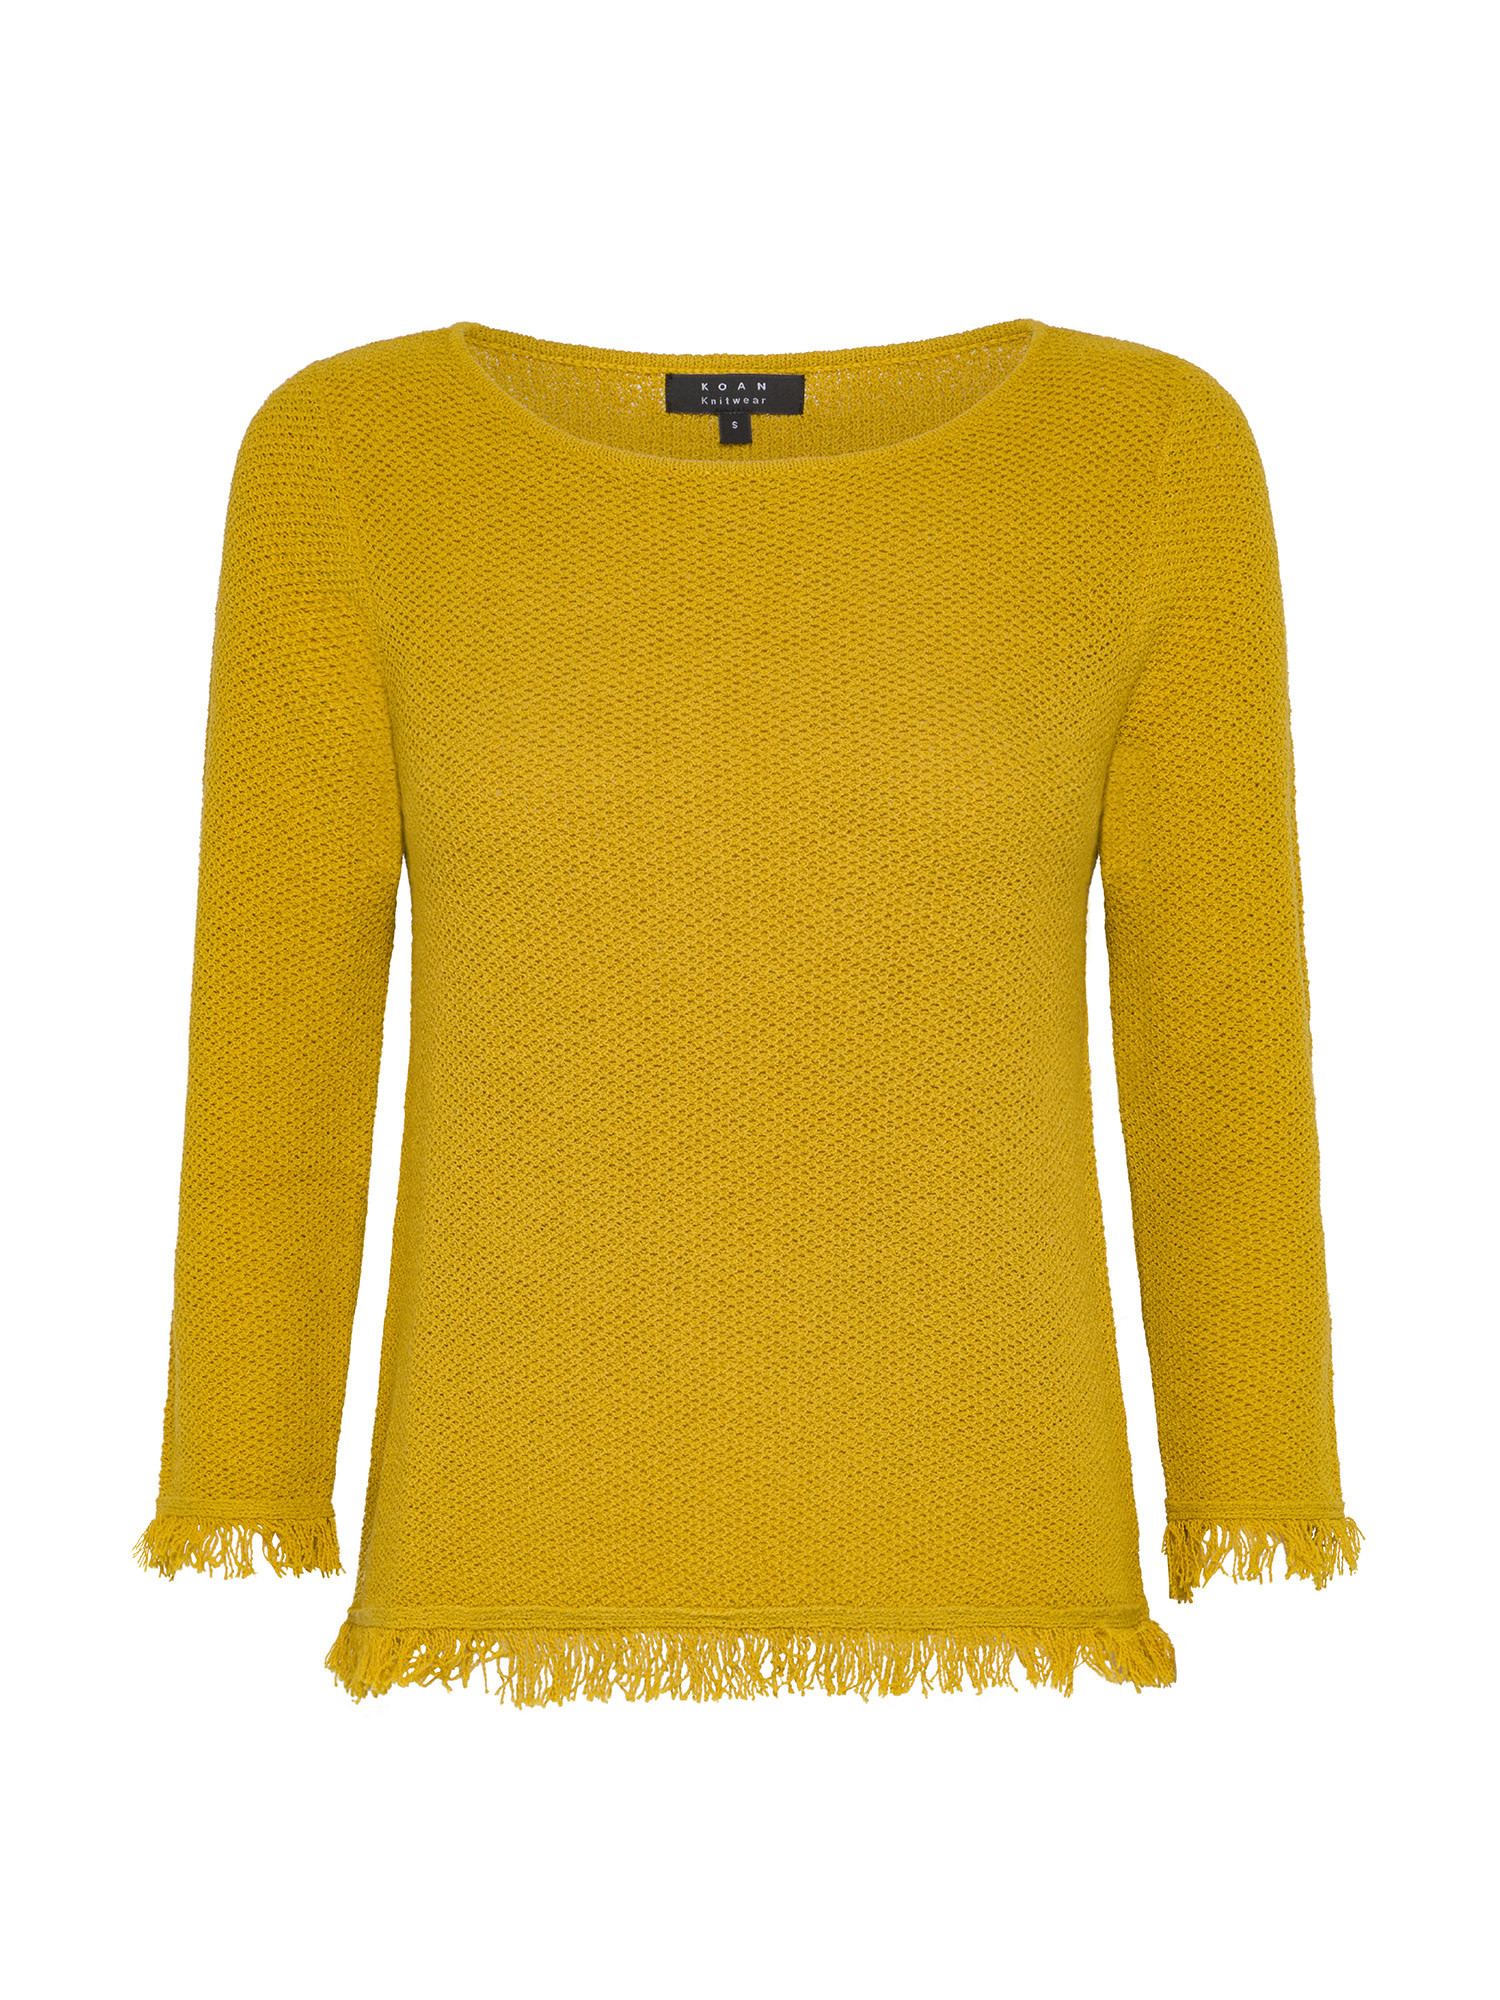 Koan - Pullover with fringes, Ocra Yellow, large image number 0